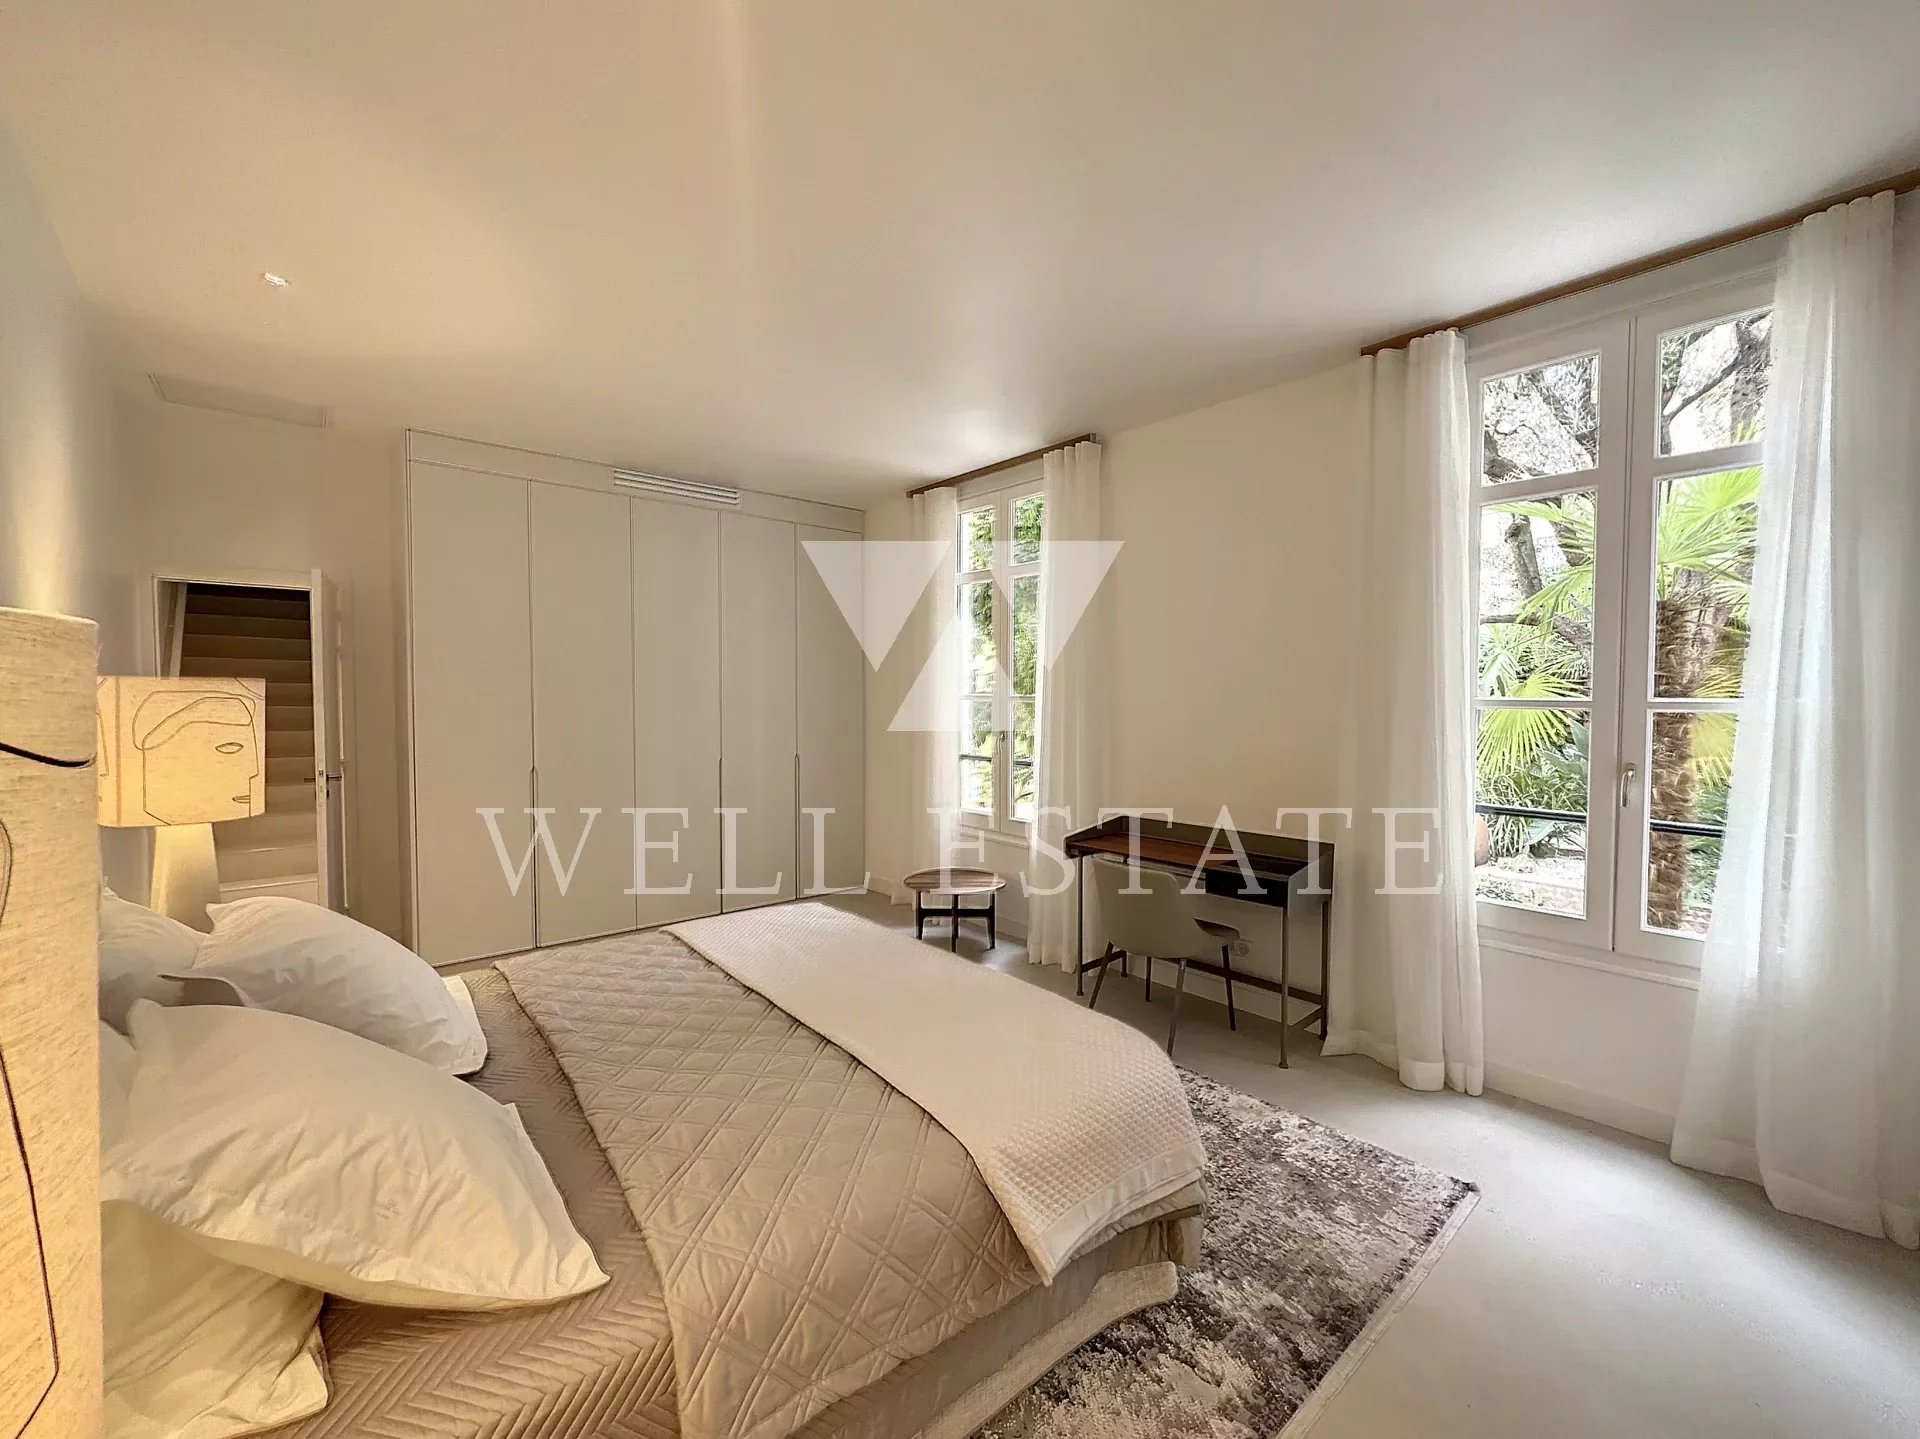 CANNES RUE D'ANTIBES CHARMING 3-BEDROOM VILLA WITH PATIO